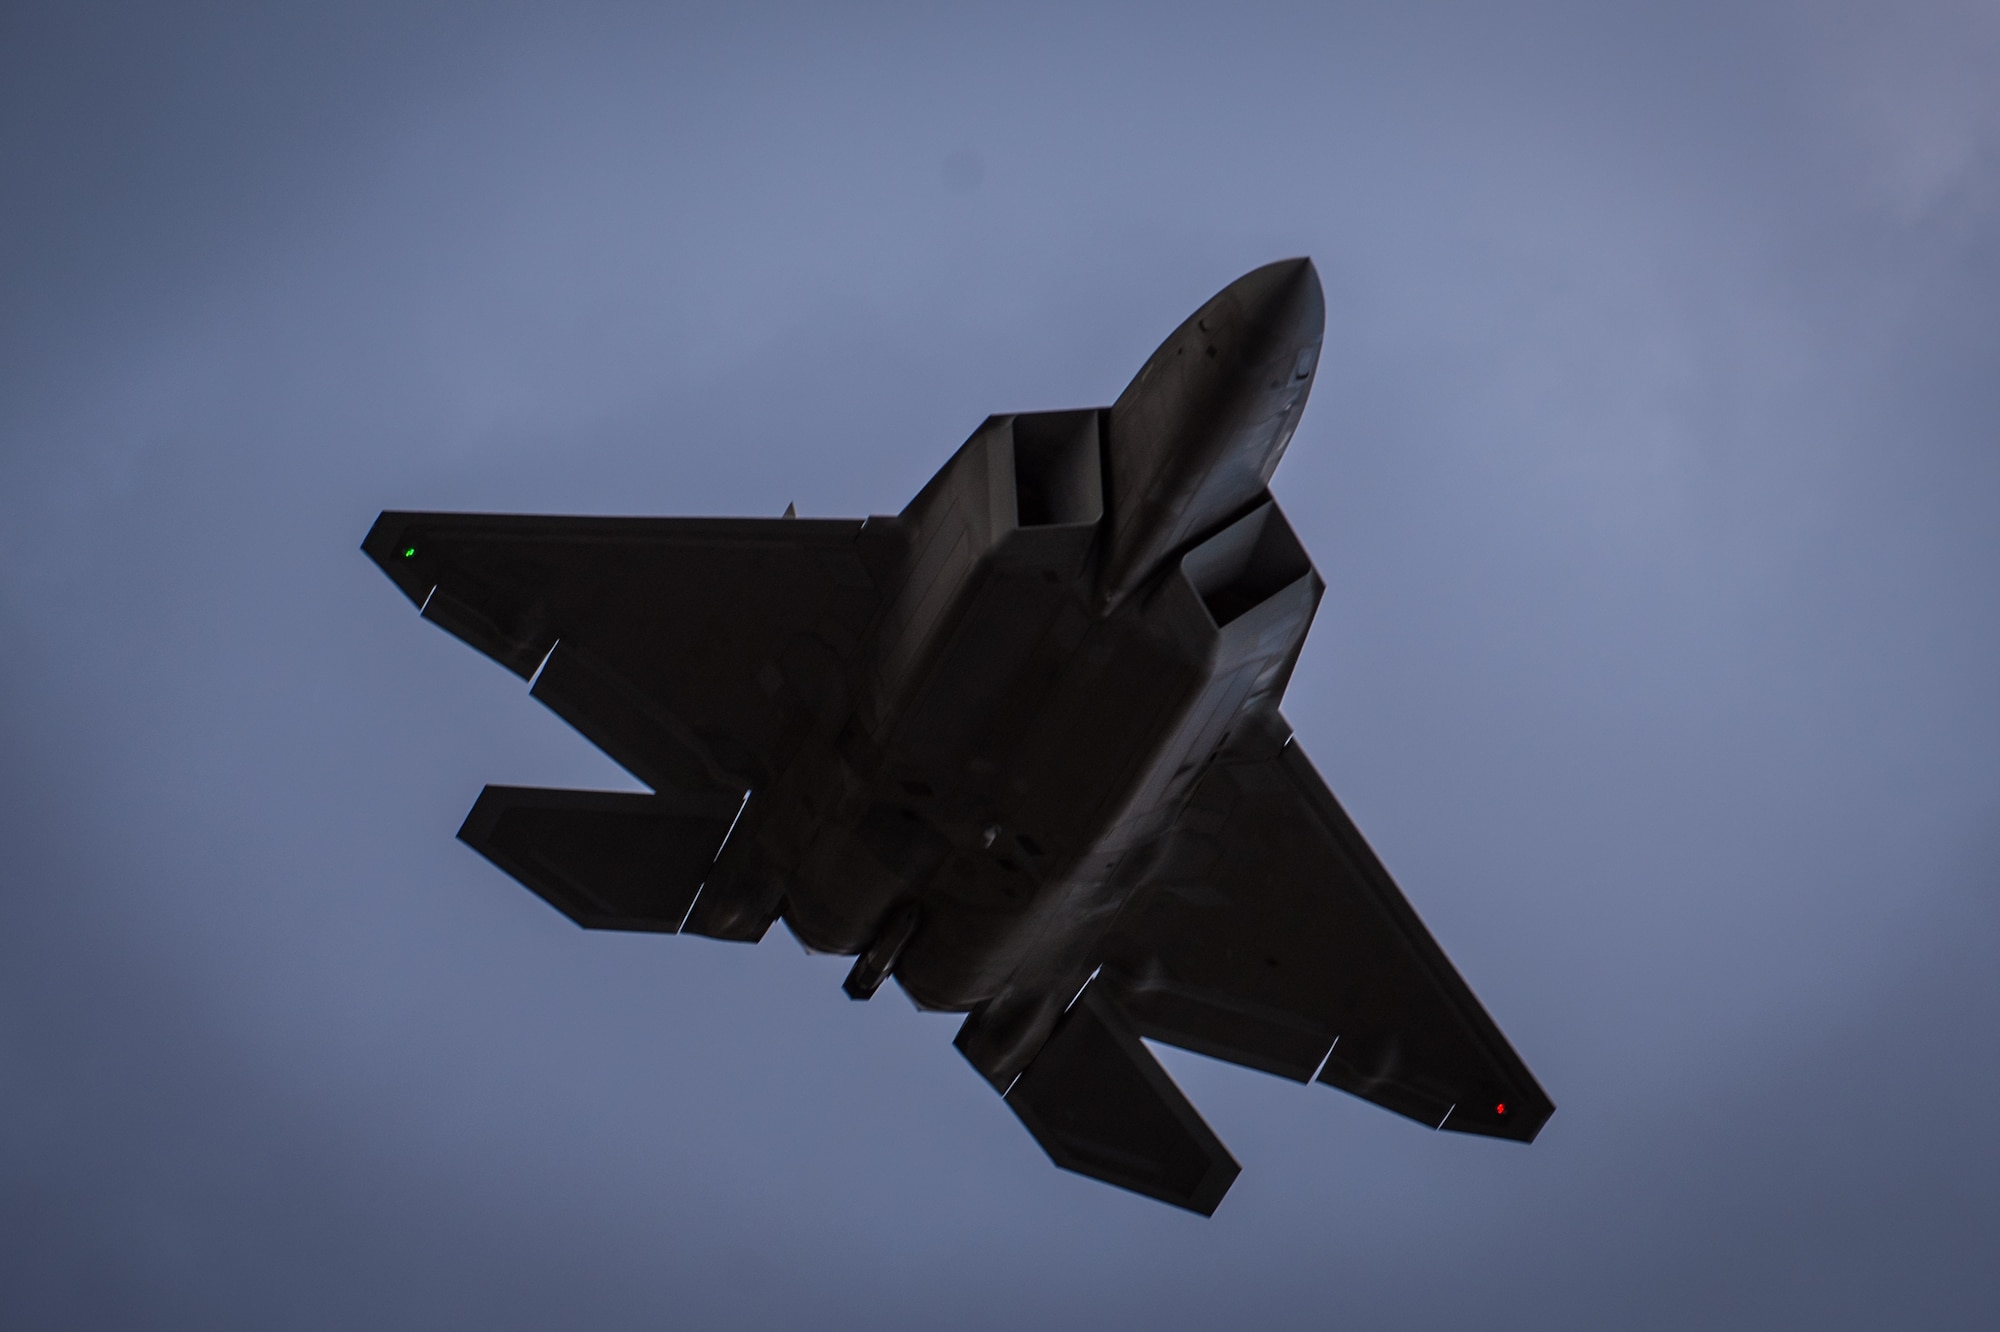 An F-22 Raptor soars through the sky above Joint Base Elmendorf-Richardson, Alaska, May 10, 2018. The Air Force announced the temporary relocation of personnel and F-22s from the 95th Fighter Squadron, Tyndall Air Force Base, Florida, to Joint Base (JB) Pearl Harbor-Hickam, Hawaii, and JB Elmendorf-Richardson, Alaska, Nov. 2, 2018. The unit is being relocated as Tyndall begins its long-term recovery following the devastation caused by Hurricane Michael, which struck the base in early October 2018..